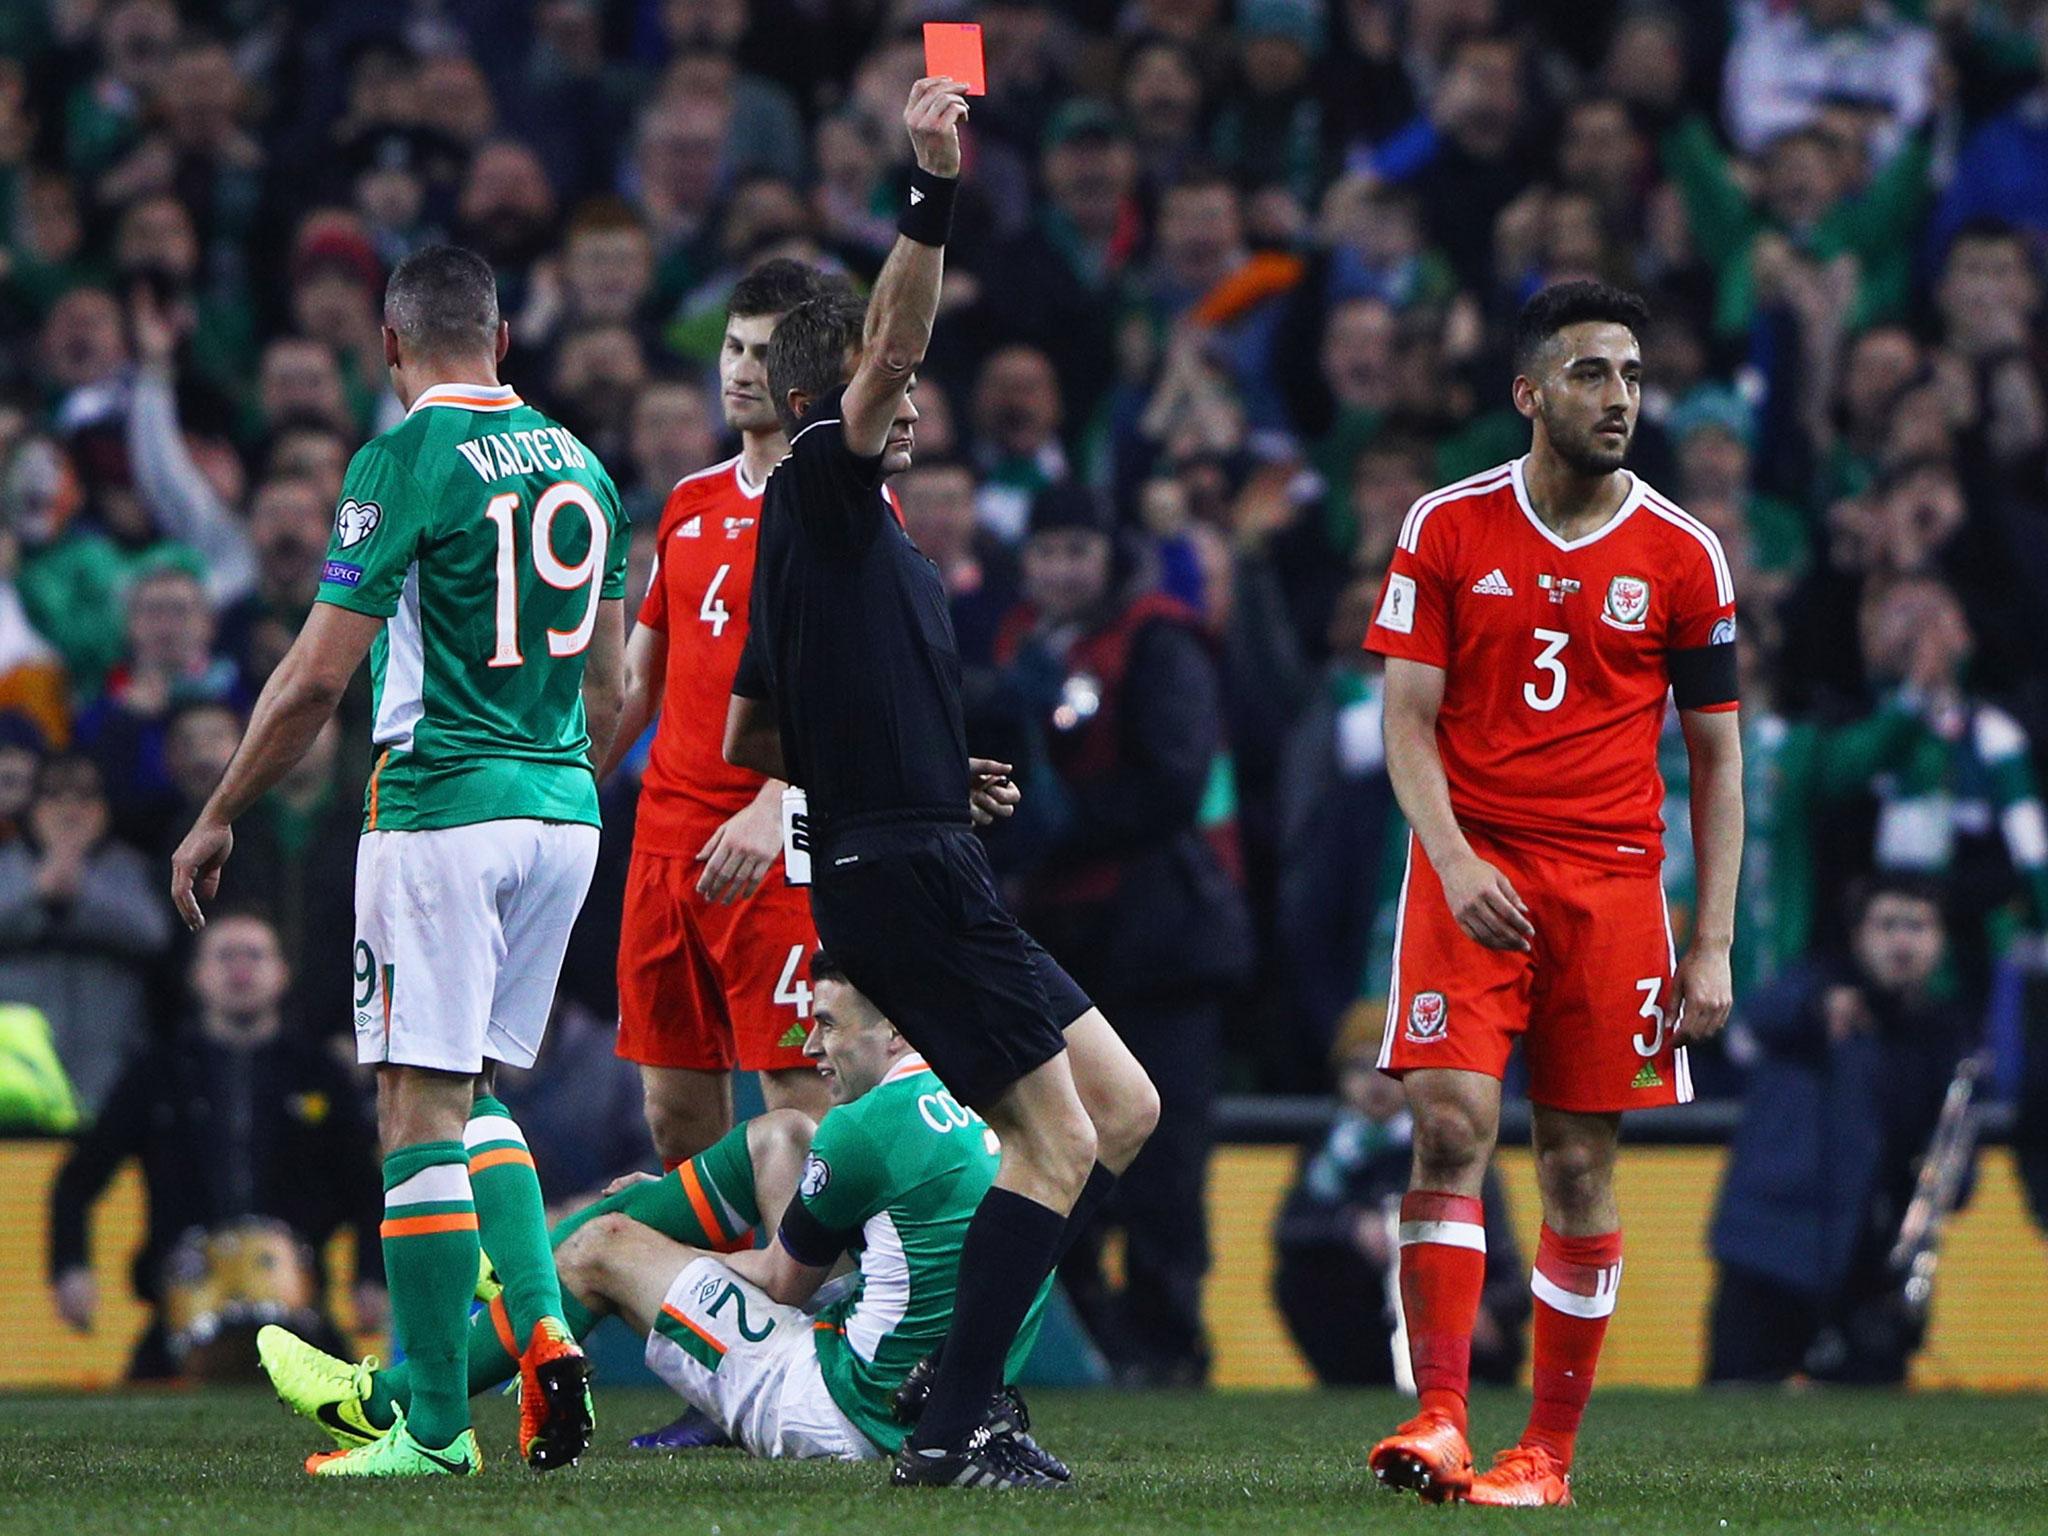 Neil Taylor was sent-off for his challenge on Coleman